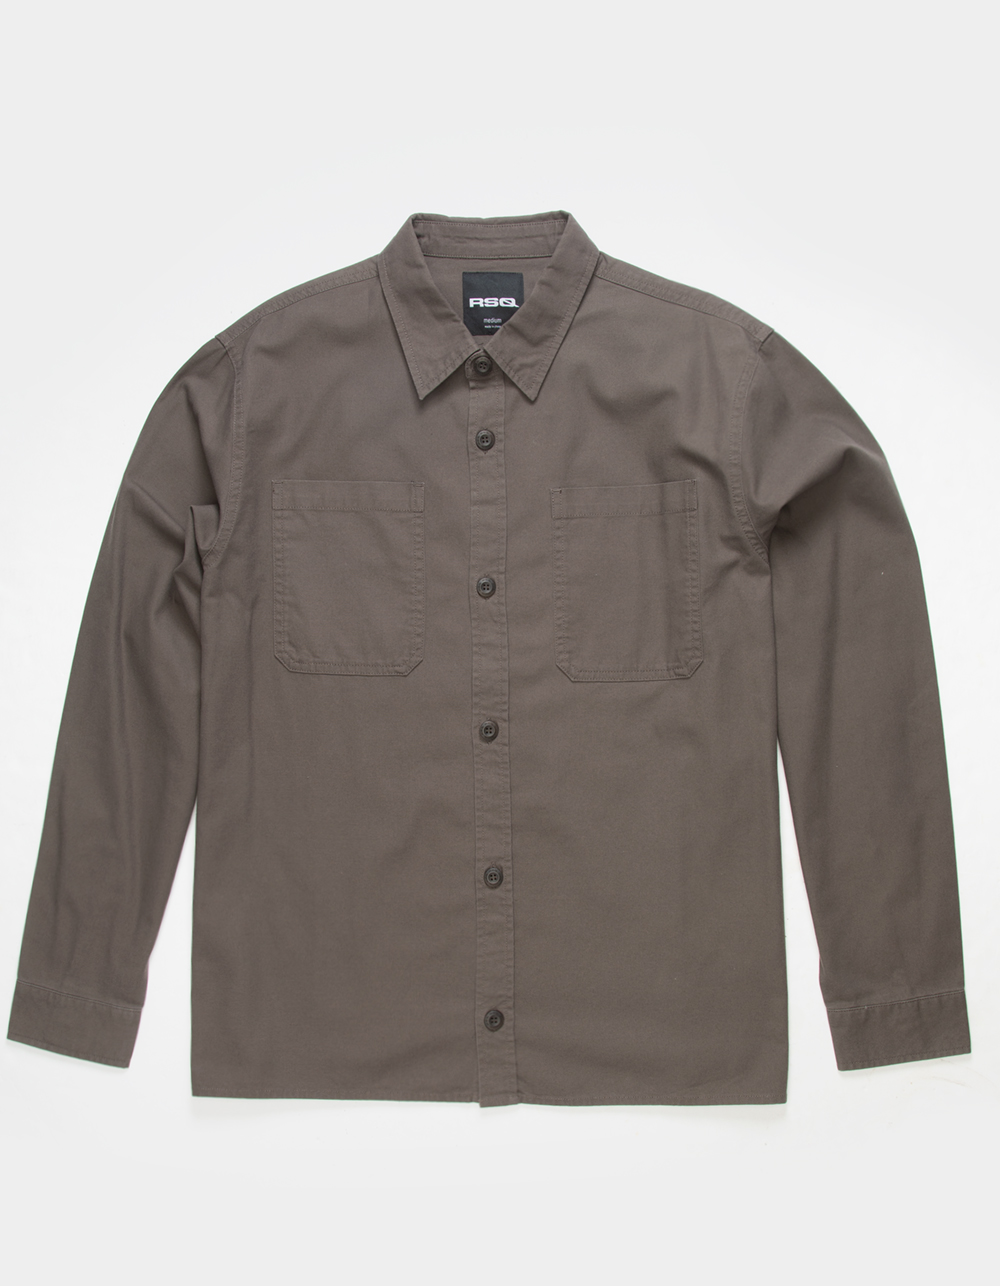 RSQ Mens Canvas Button Up Shirt - GRAY | Tillys